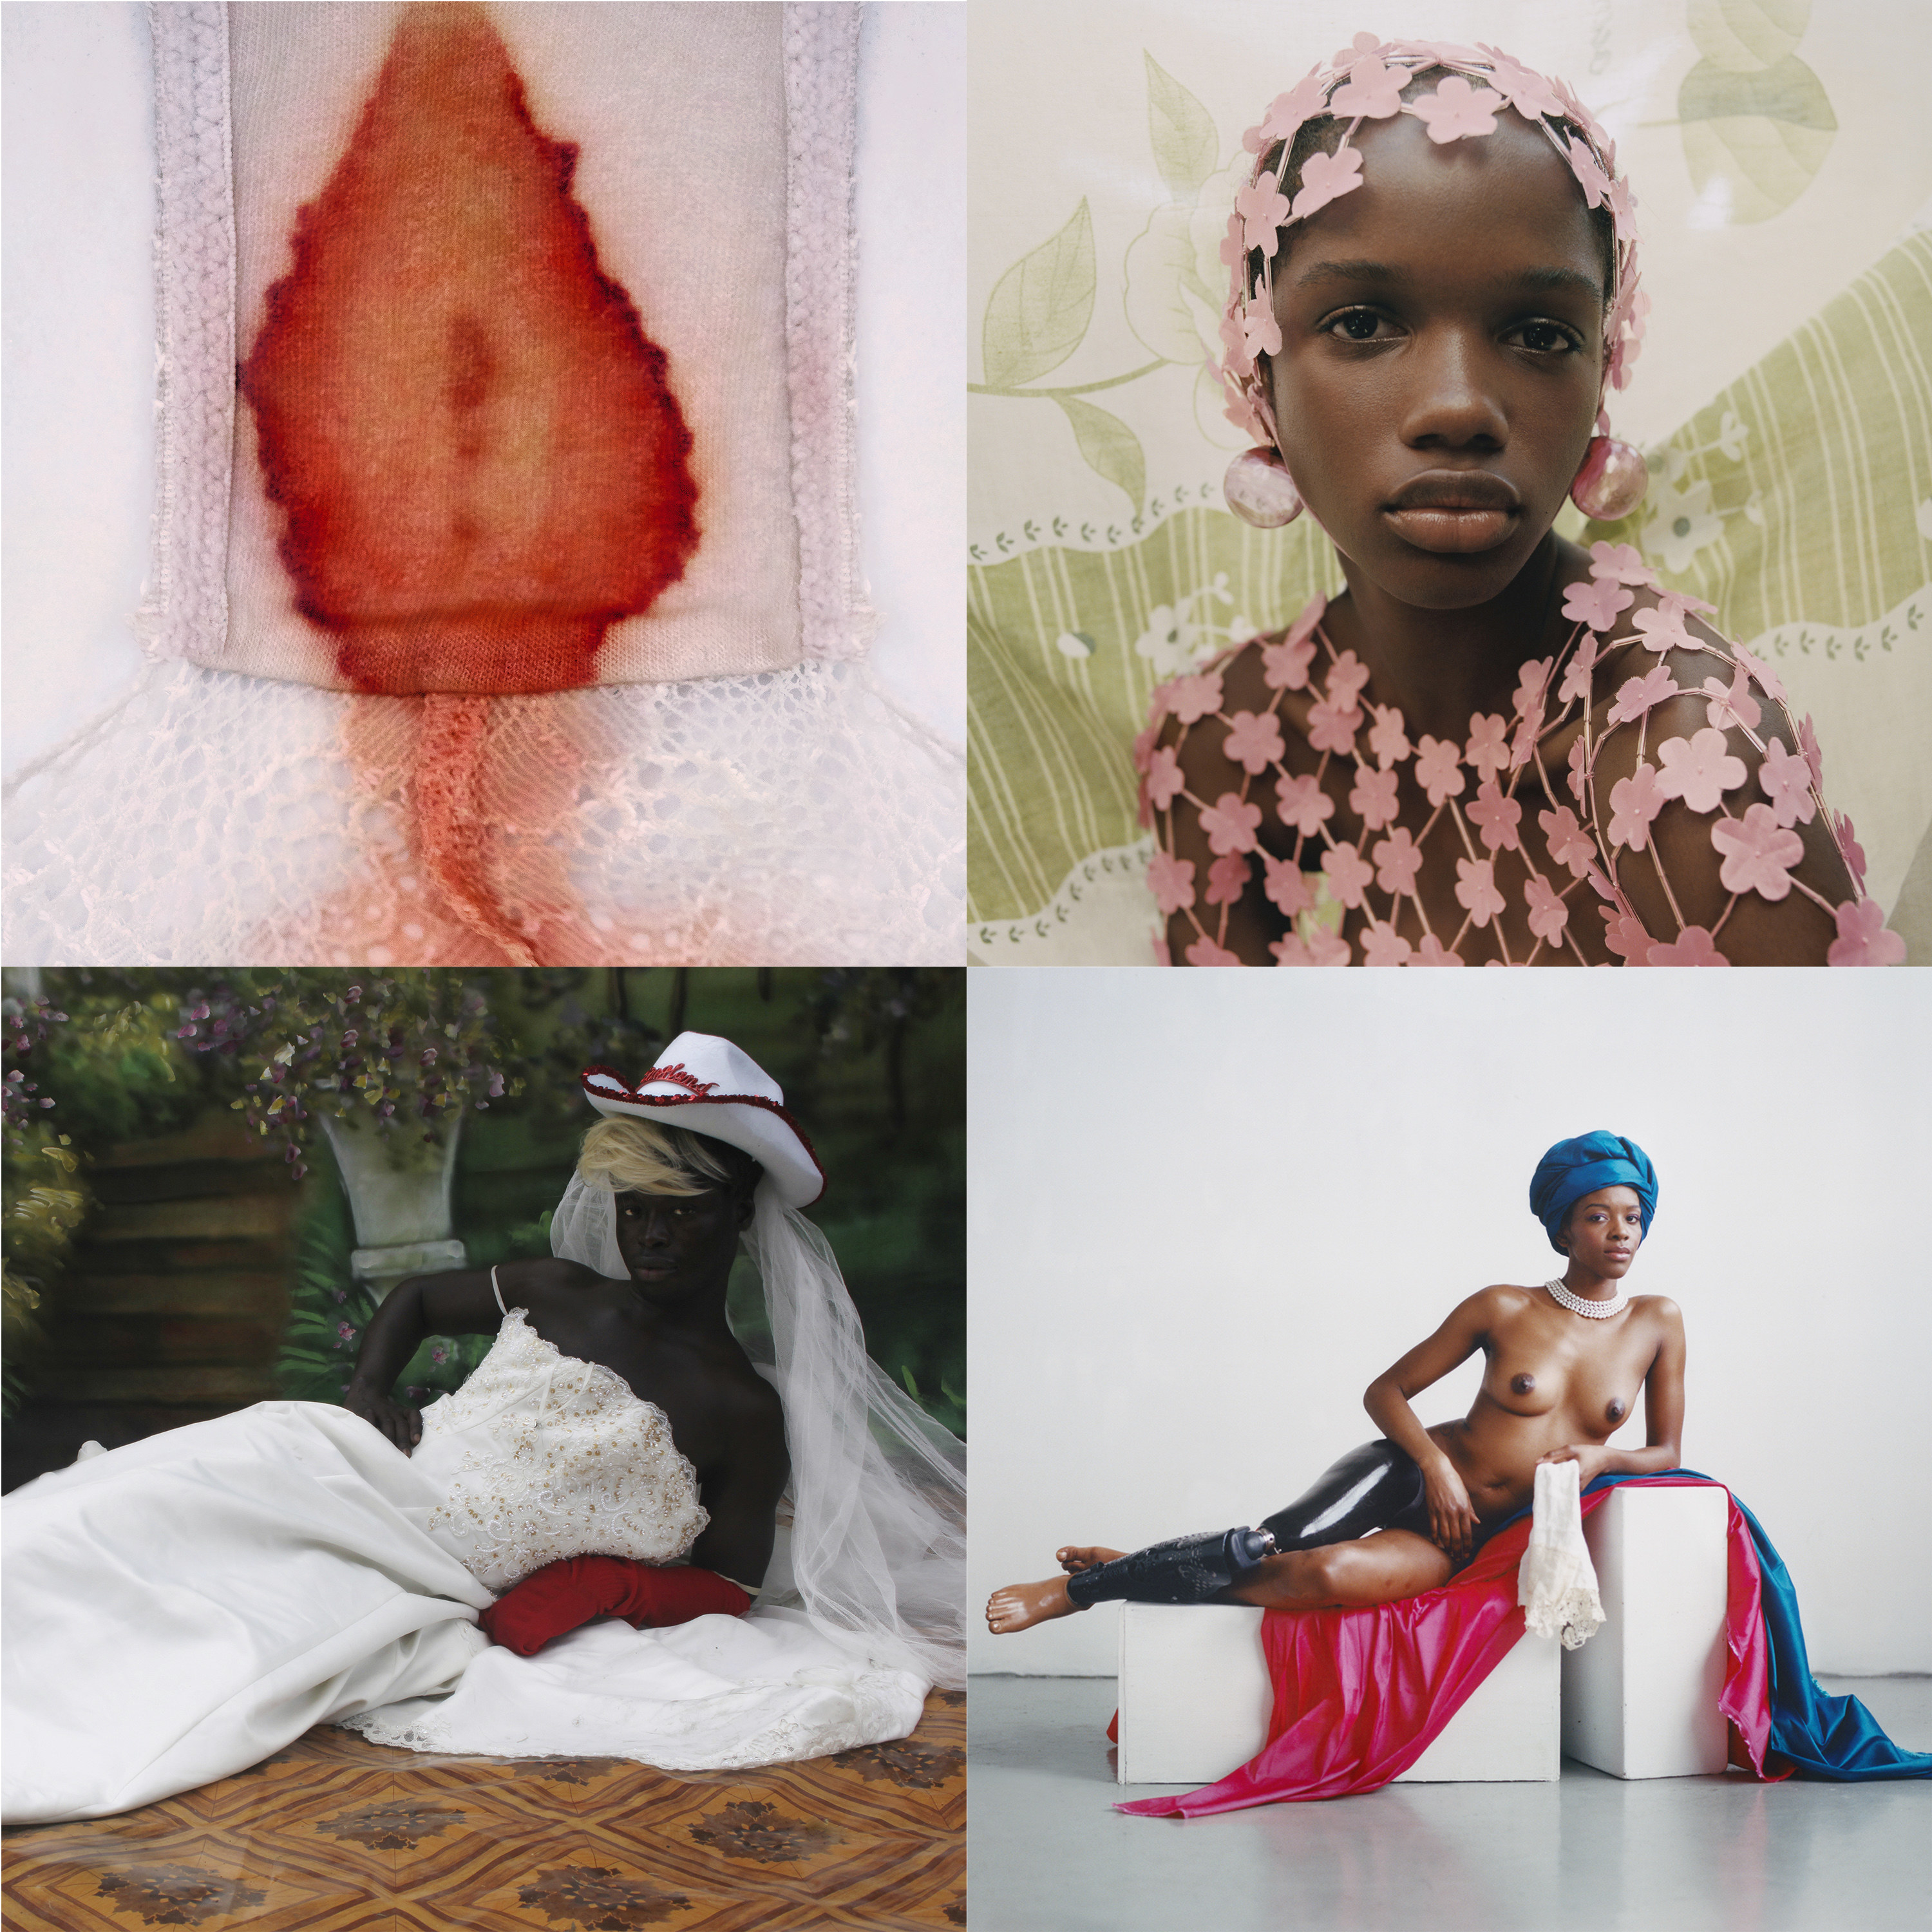 A close up image of blood on underwear, a young woman looking at the camera, a young man in a wedding dress lying down on the floor, a woman naked with a prosthetic leg looking at the camera